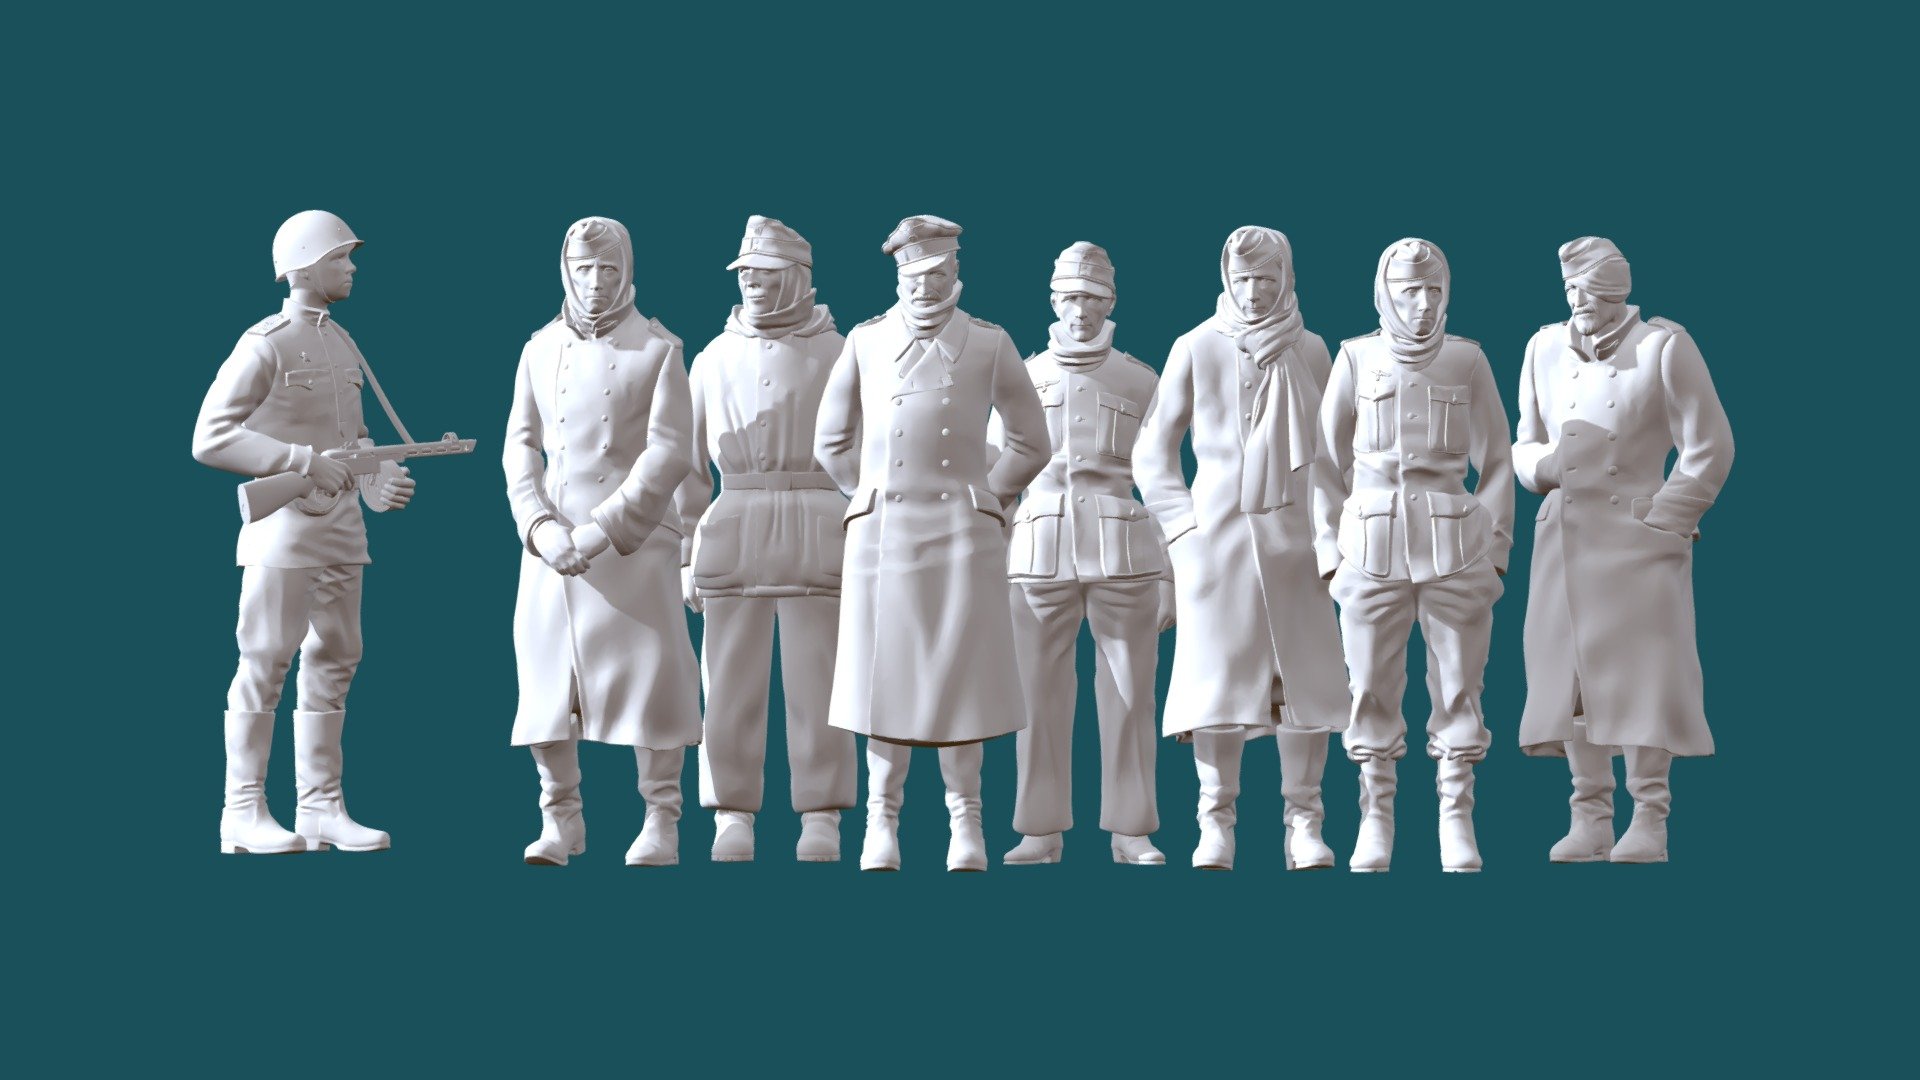 German soldiers .The format is OBJ, STL, Zbrush. Model for printing on a 3d printer. Scale 16 3d model